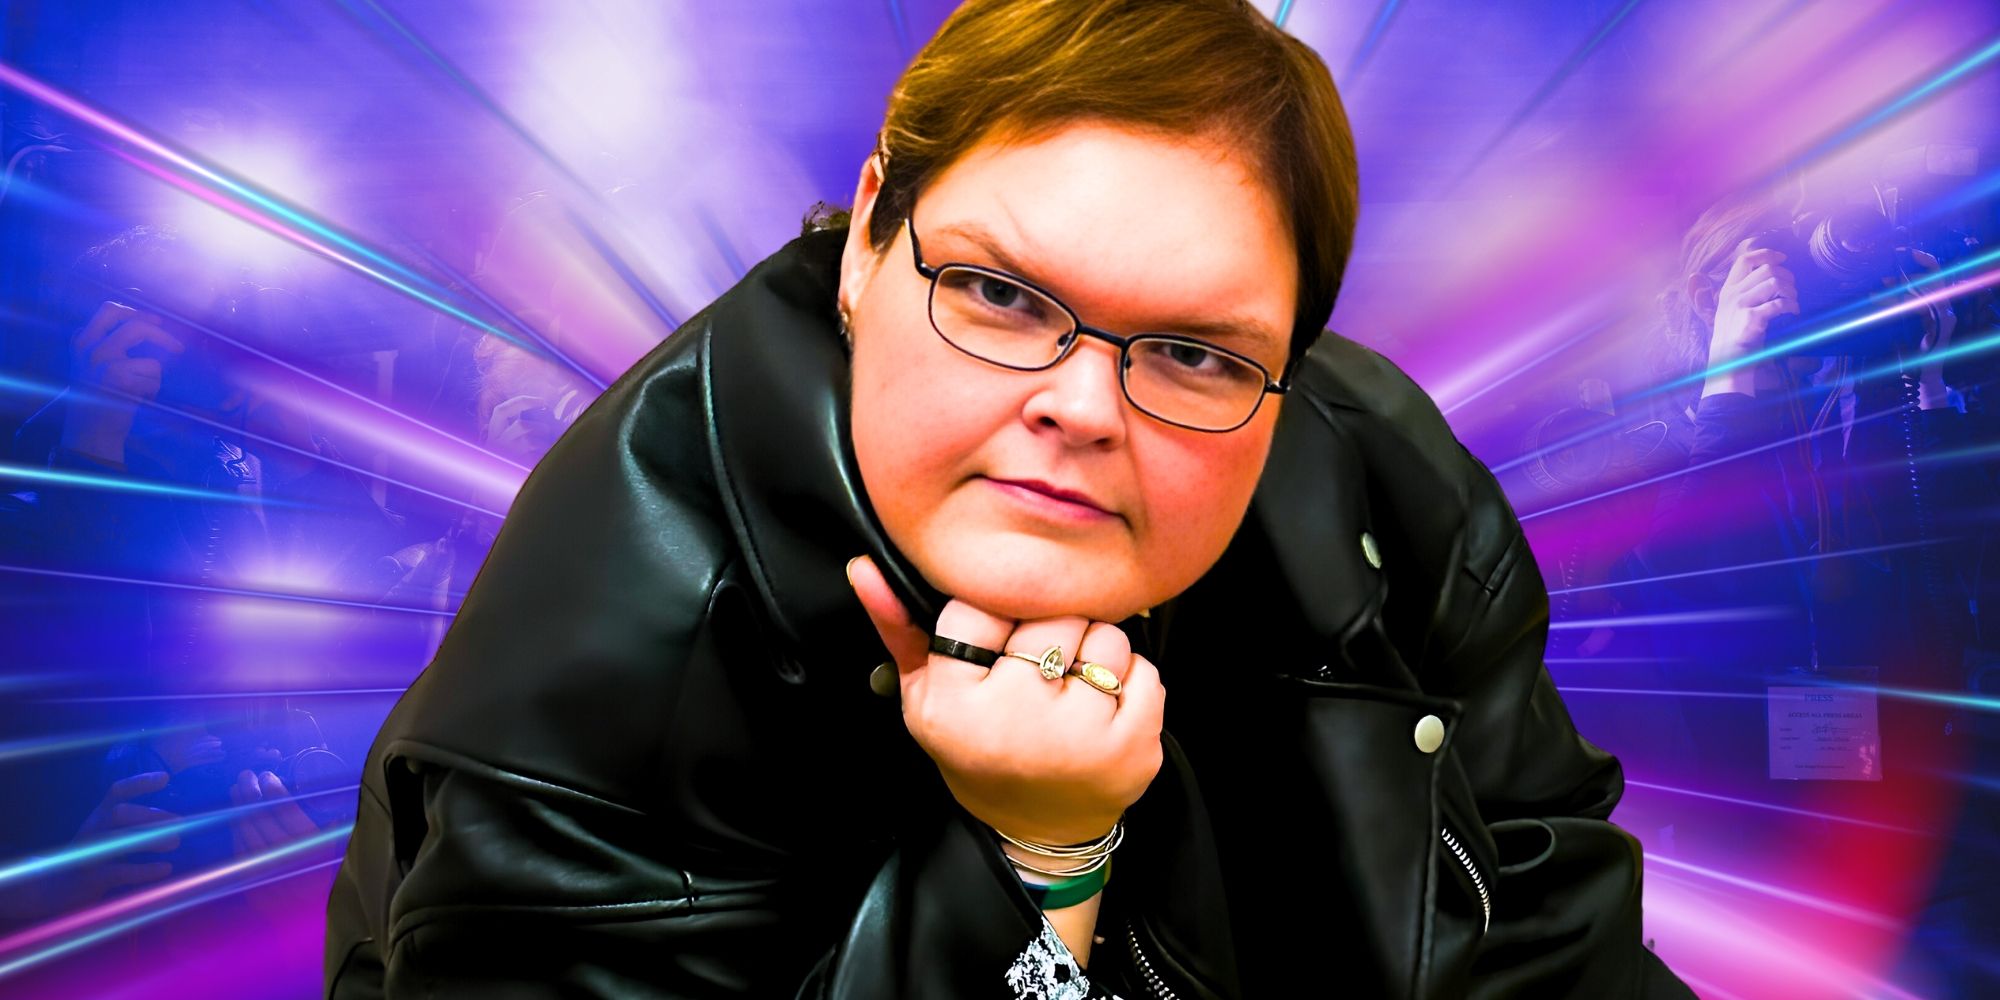 1000-Lb Sisters Tammy Slaton smiles at the camera wearing a black leather jacket with her hand on her chin with blue and purple lazers in the background